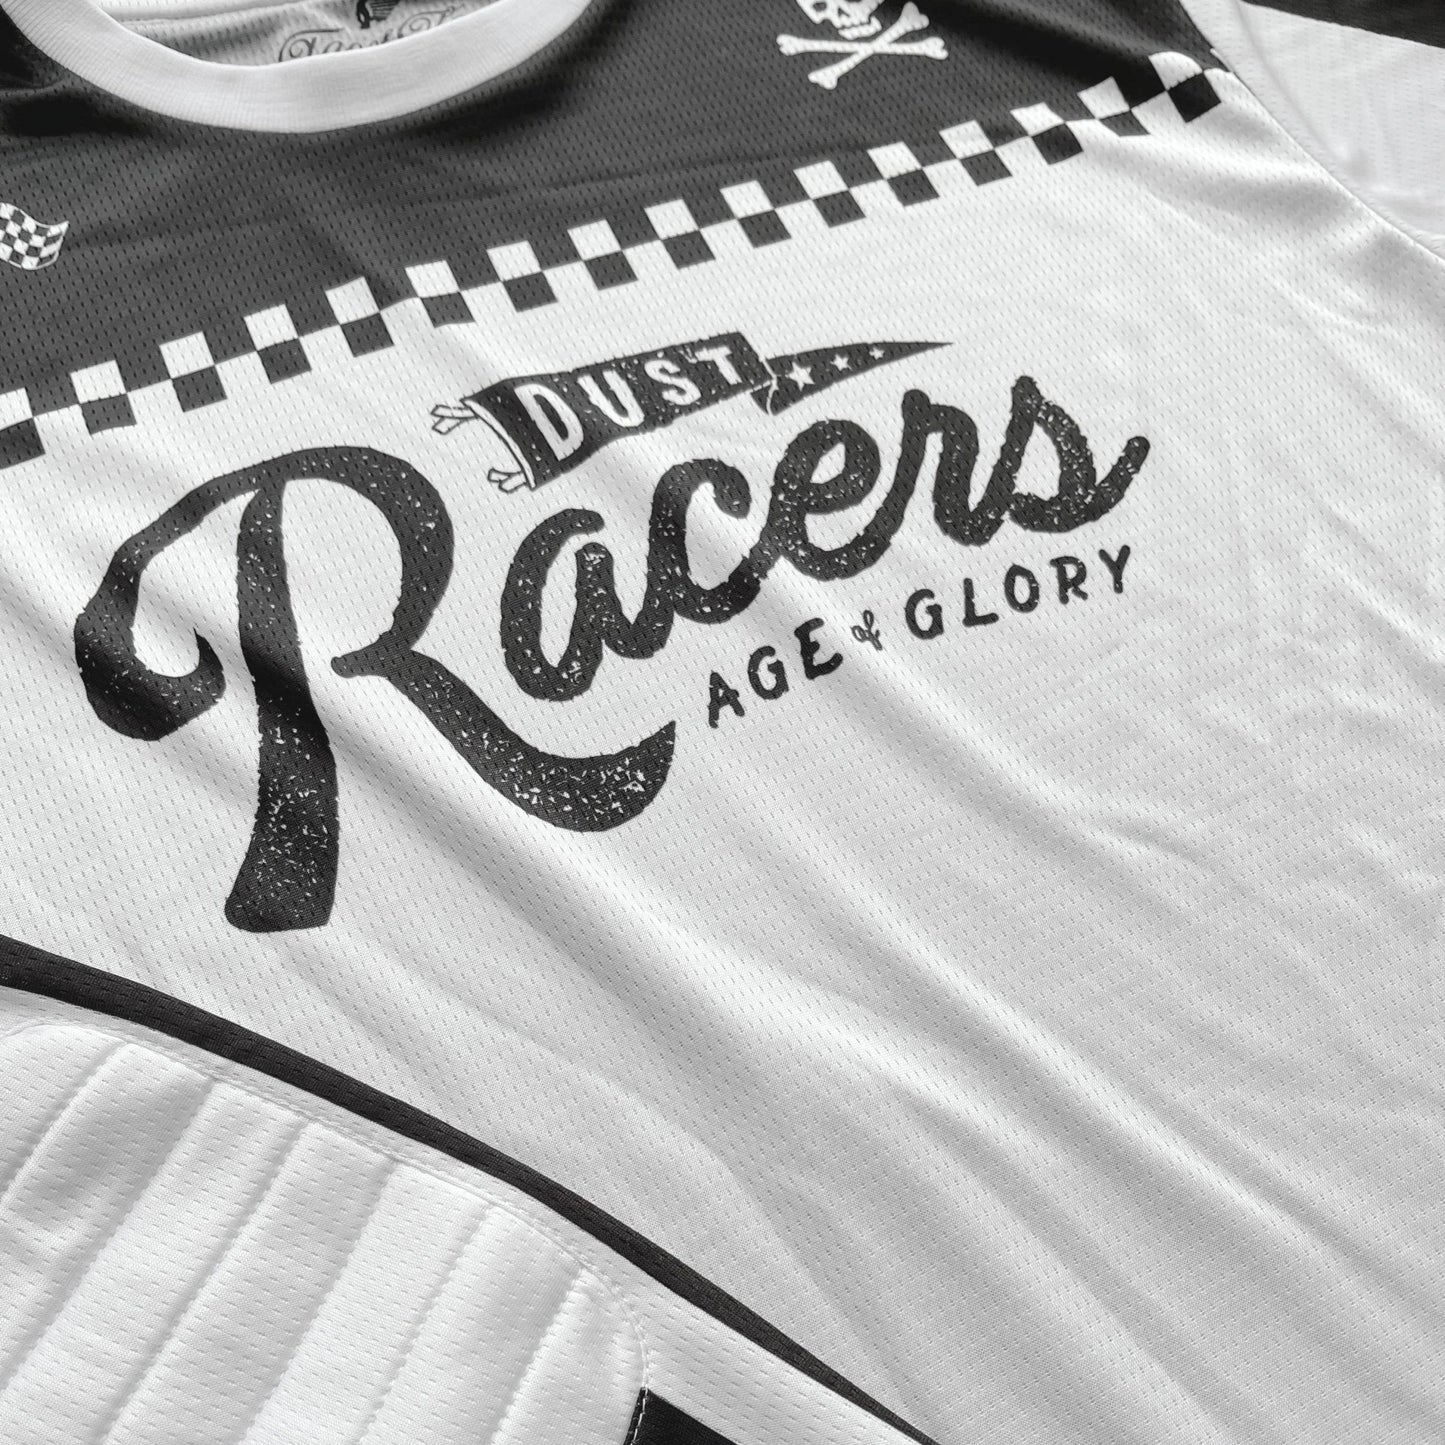 Age of Glory Racers Mesh Jersey - White/Black